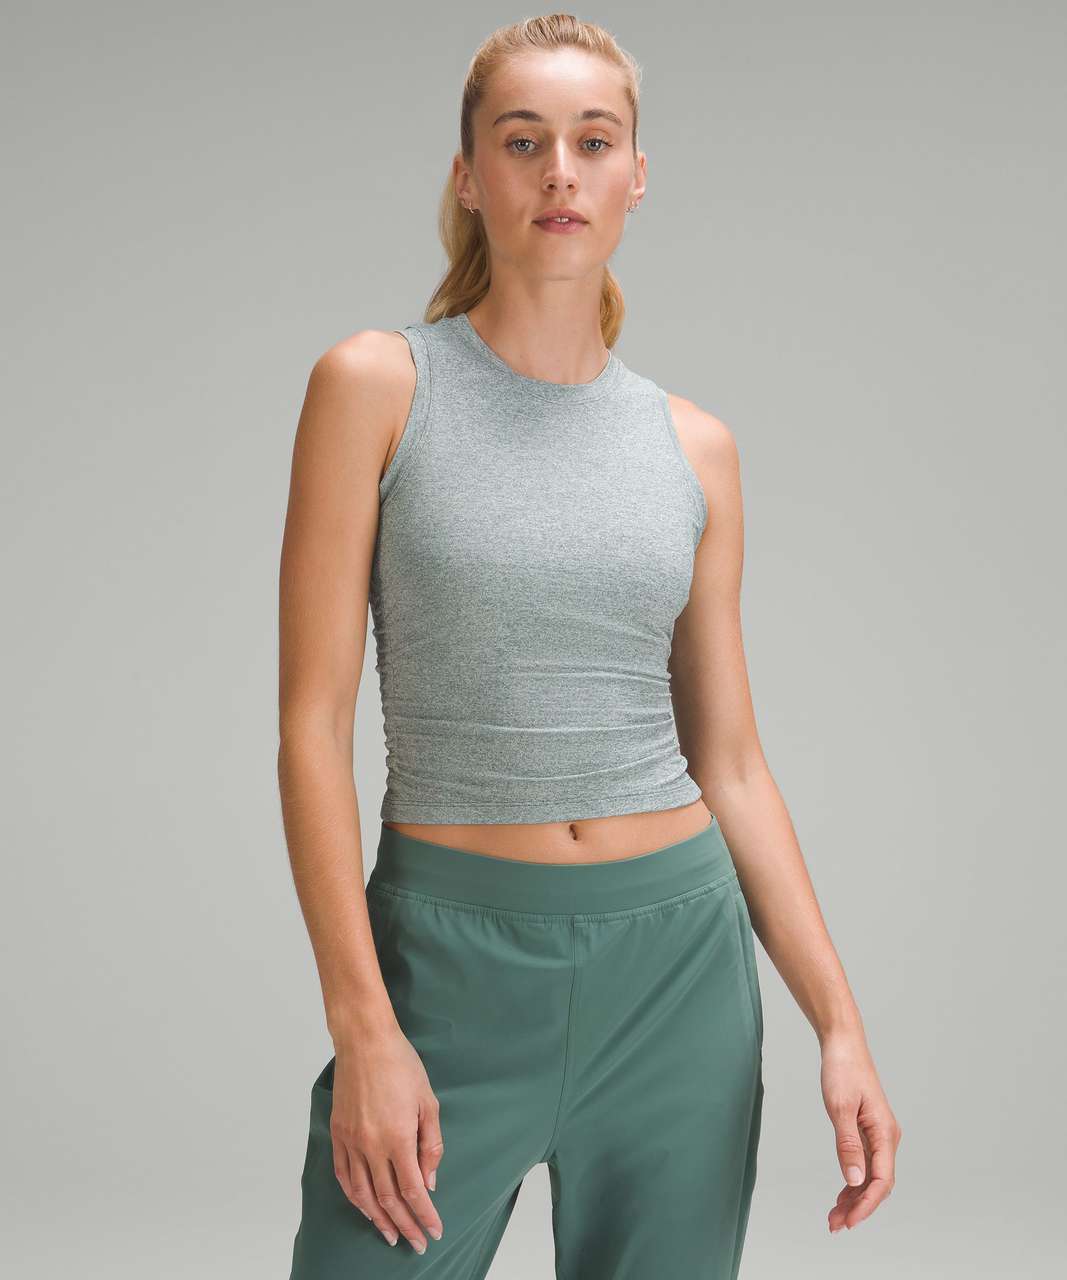 Lululemon License to Train Tight-Fit Tank Top - Heathered Medium Forest